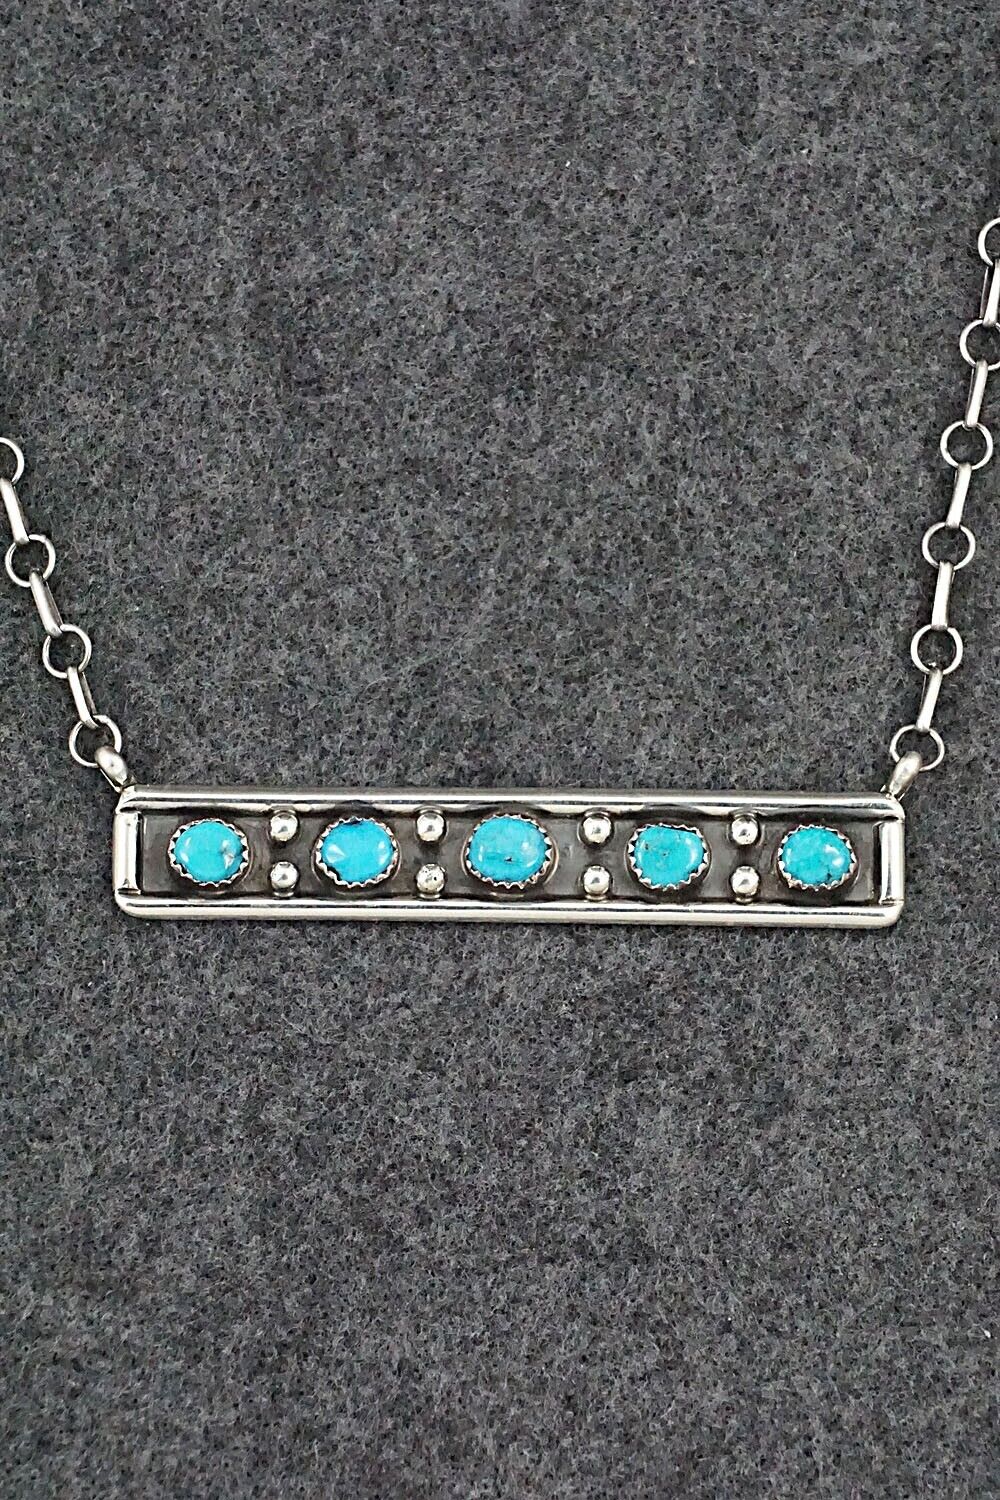 Turquoise & Sterling Silver Necklace - Paul Largo